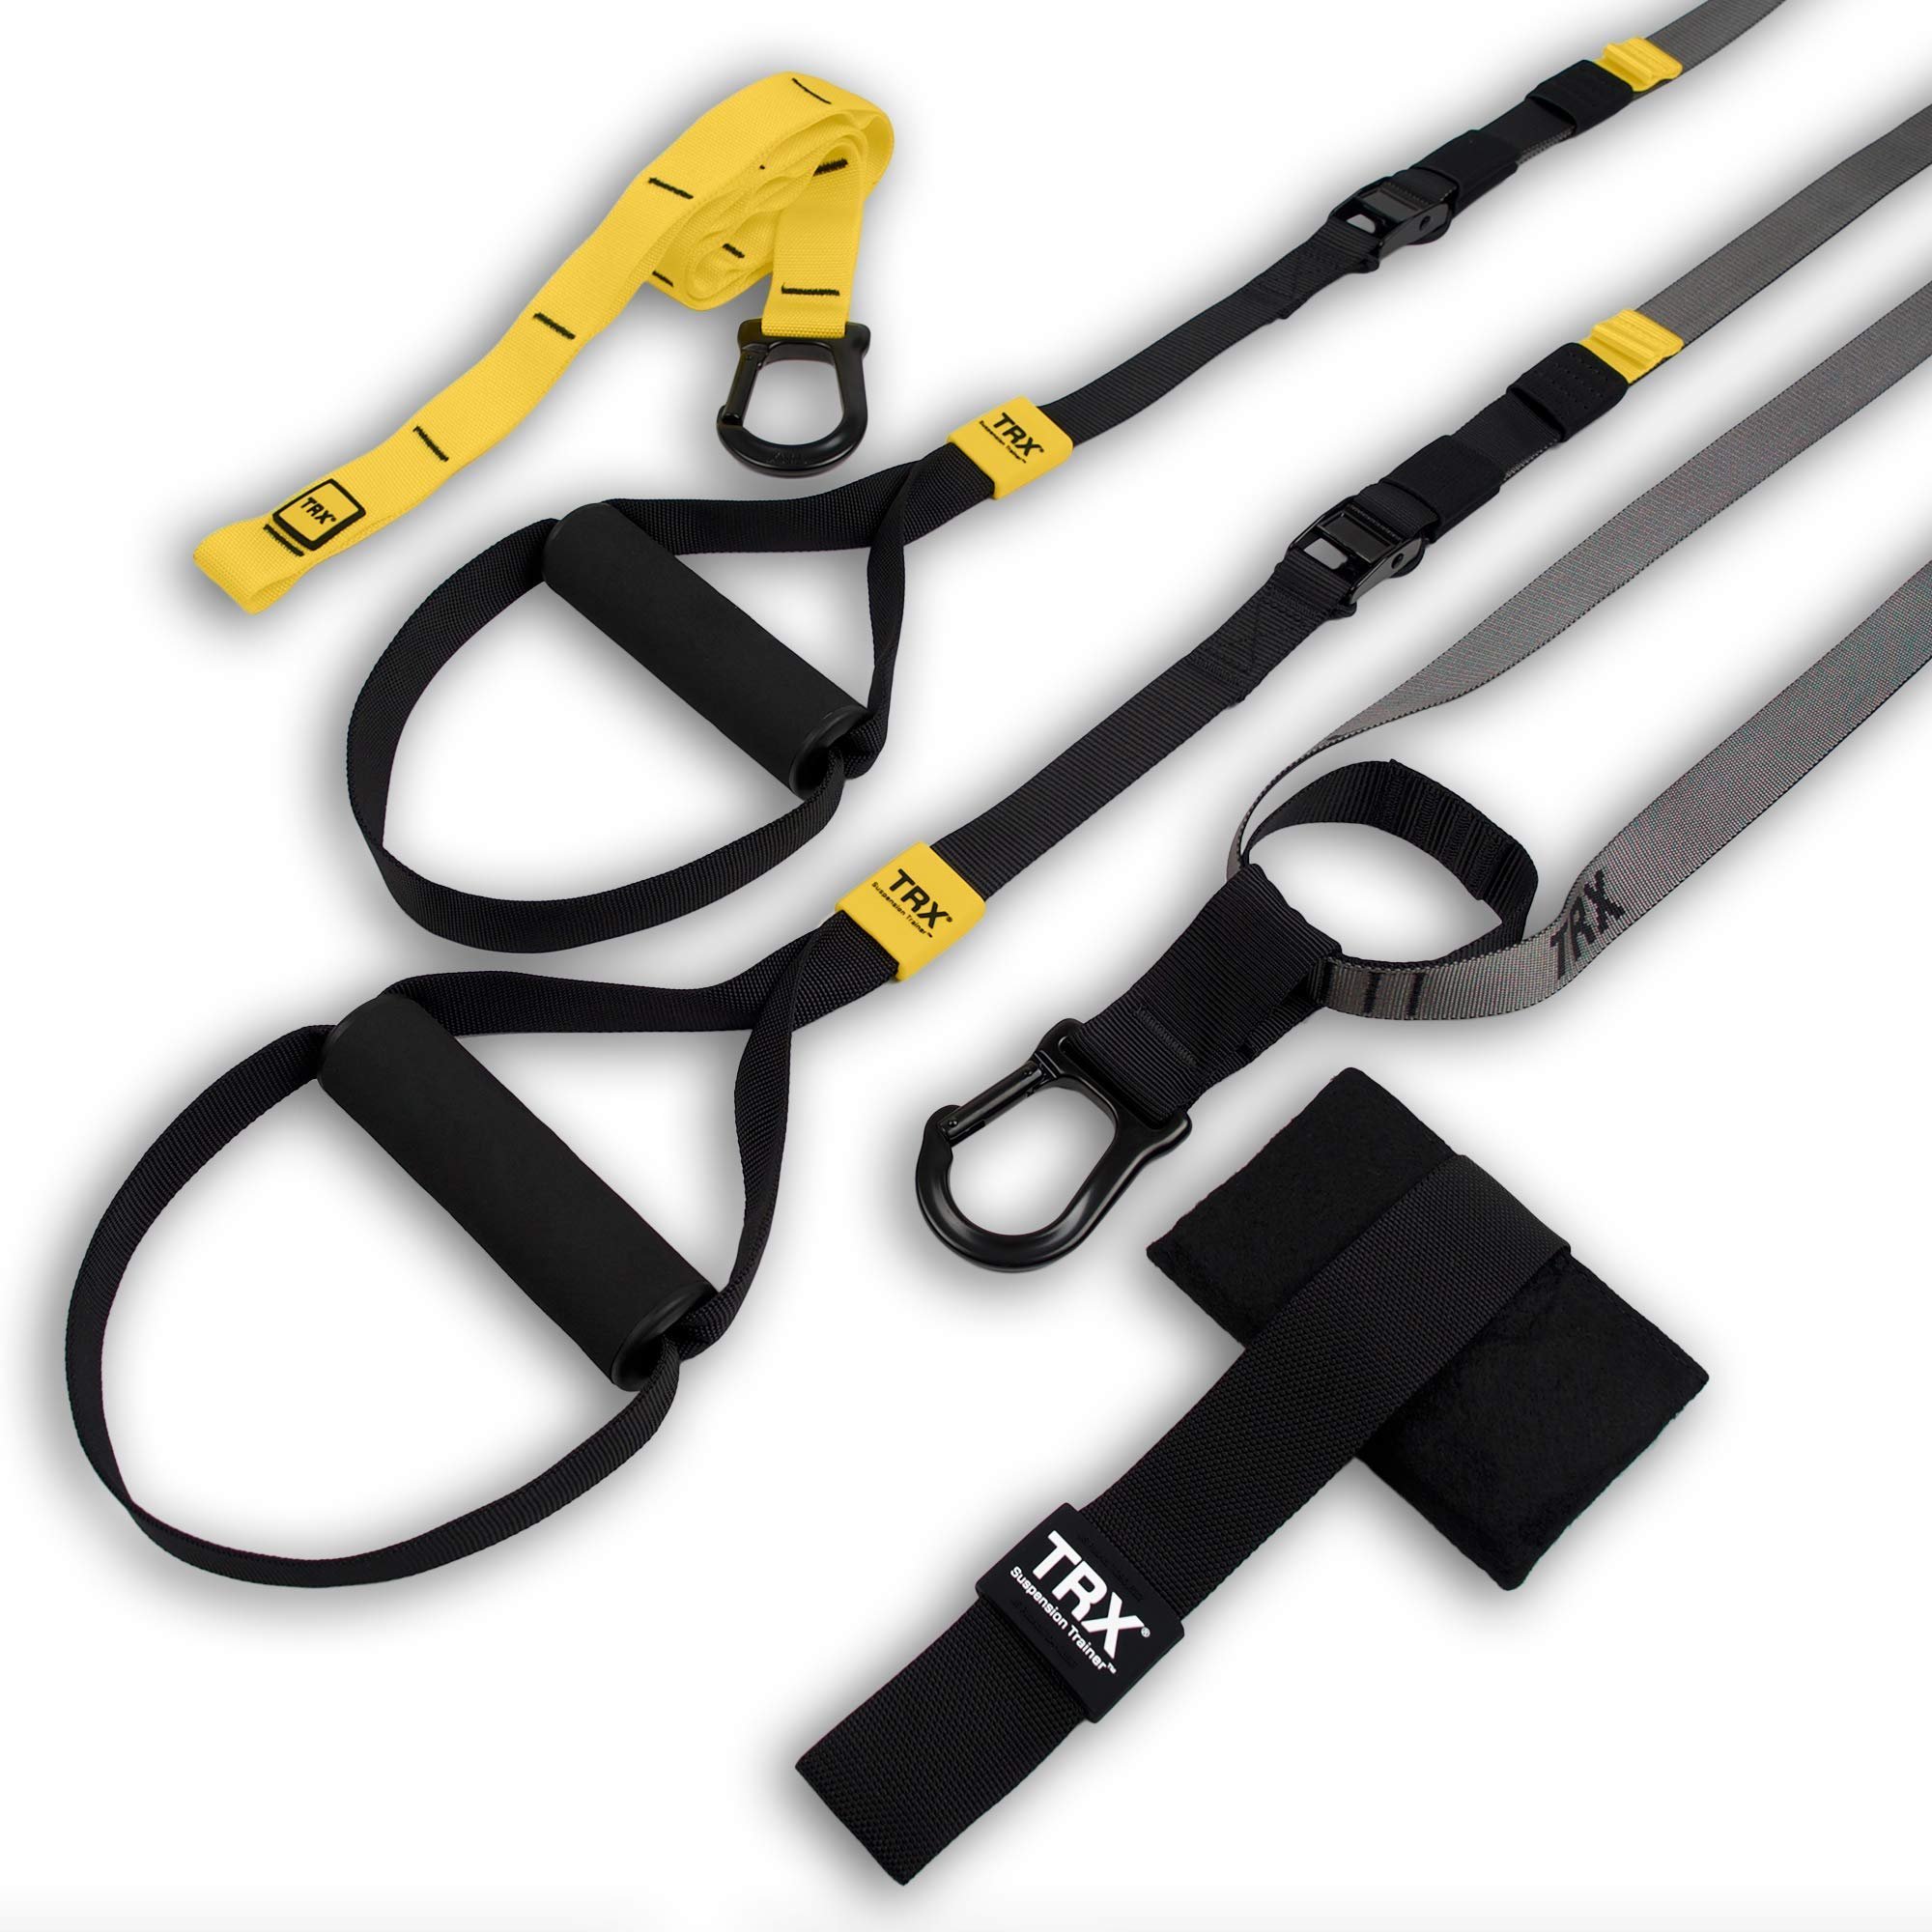 Lightweight and portable TRX GO suspension trainer system